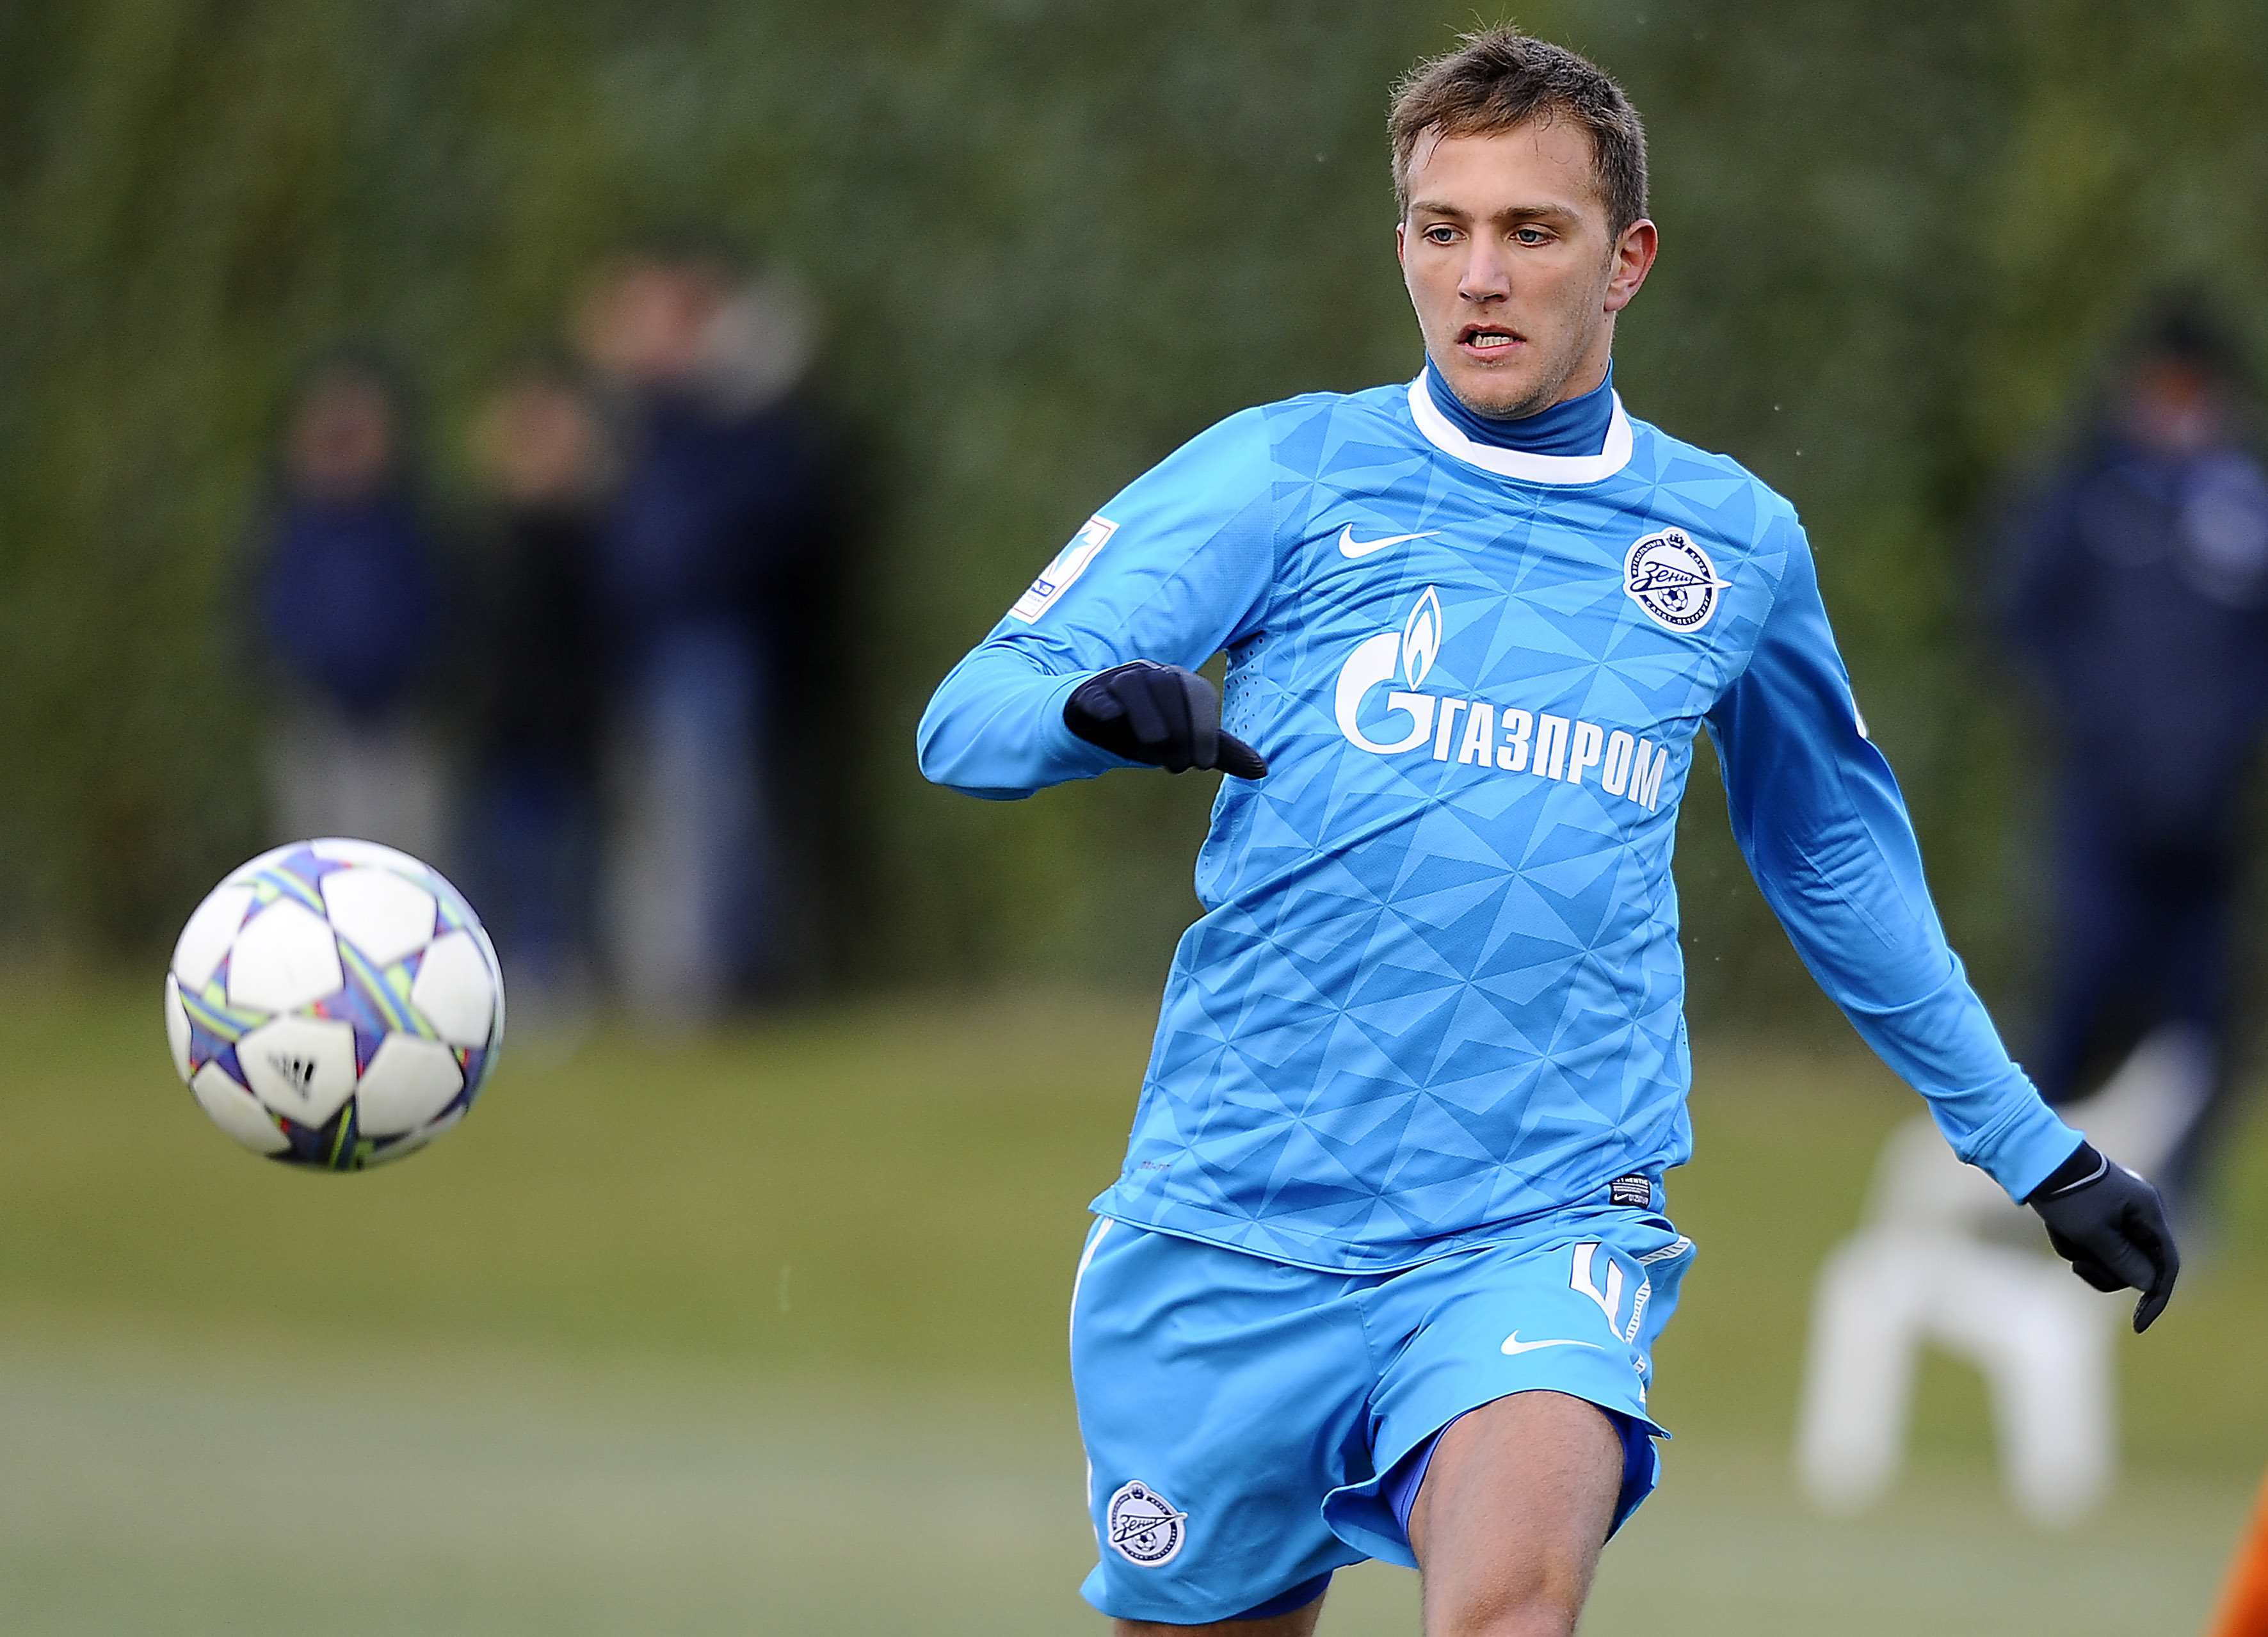 Criscito agent: “Normal that he’d want Italy return, many hypotheses…”